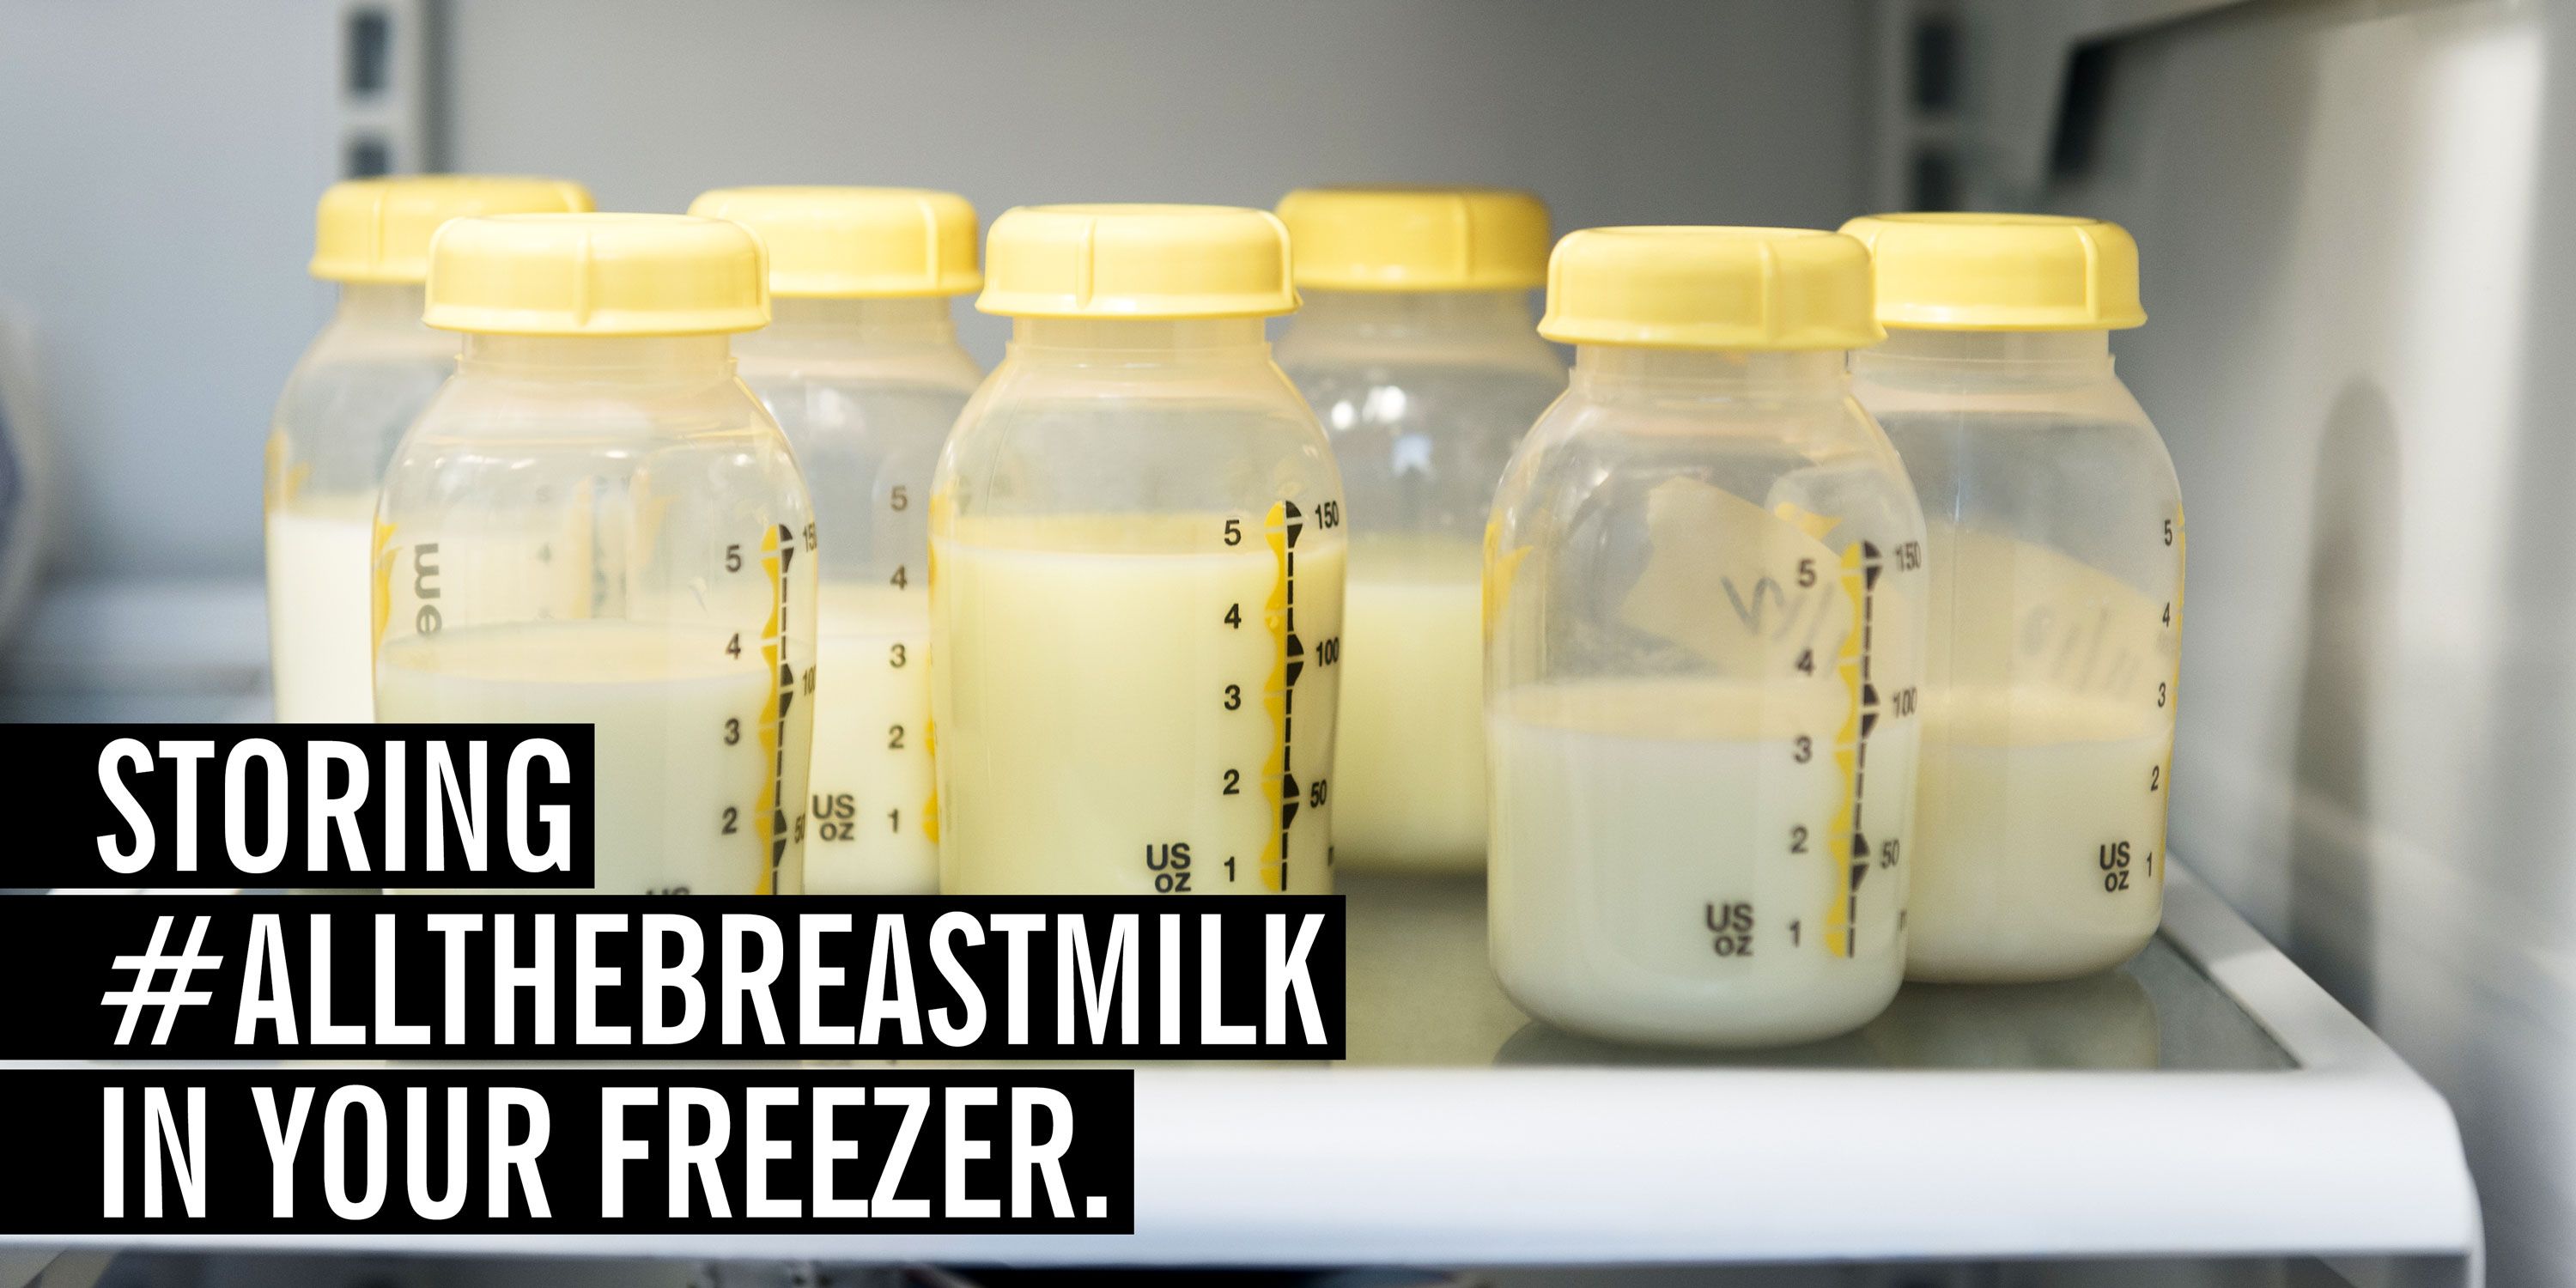 22 Reasons Why Pumping Breast Milk Is the Absolute Worst